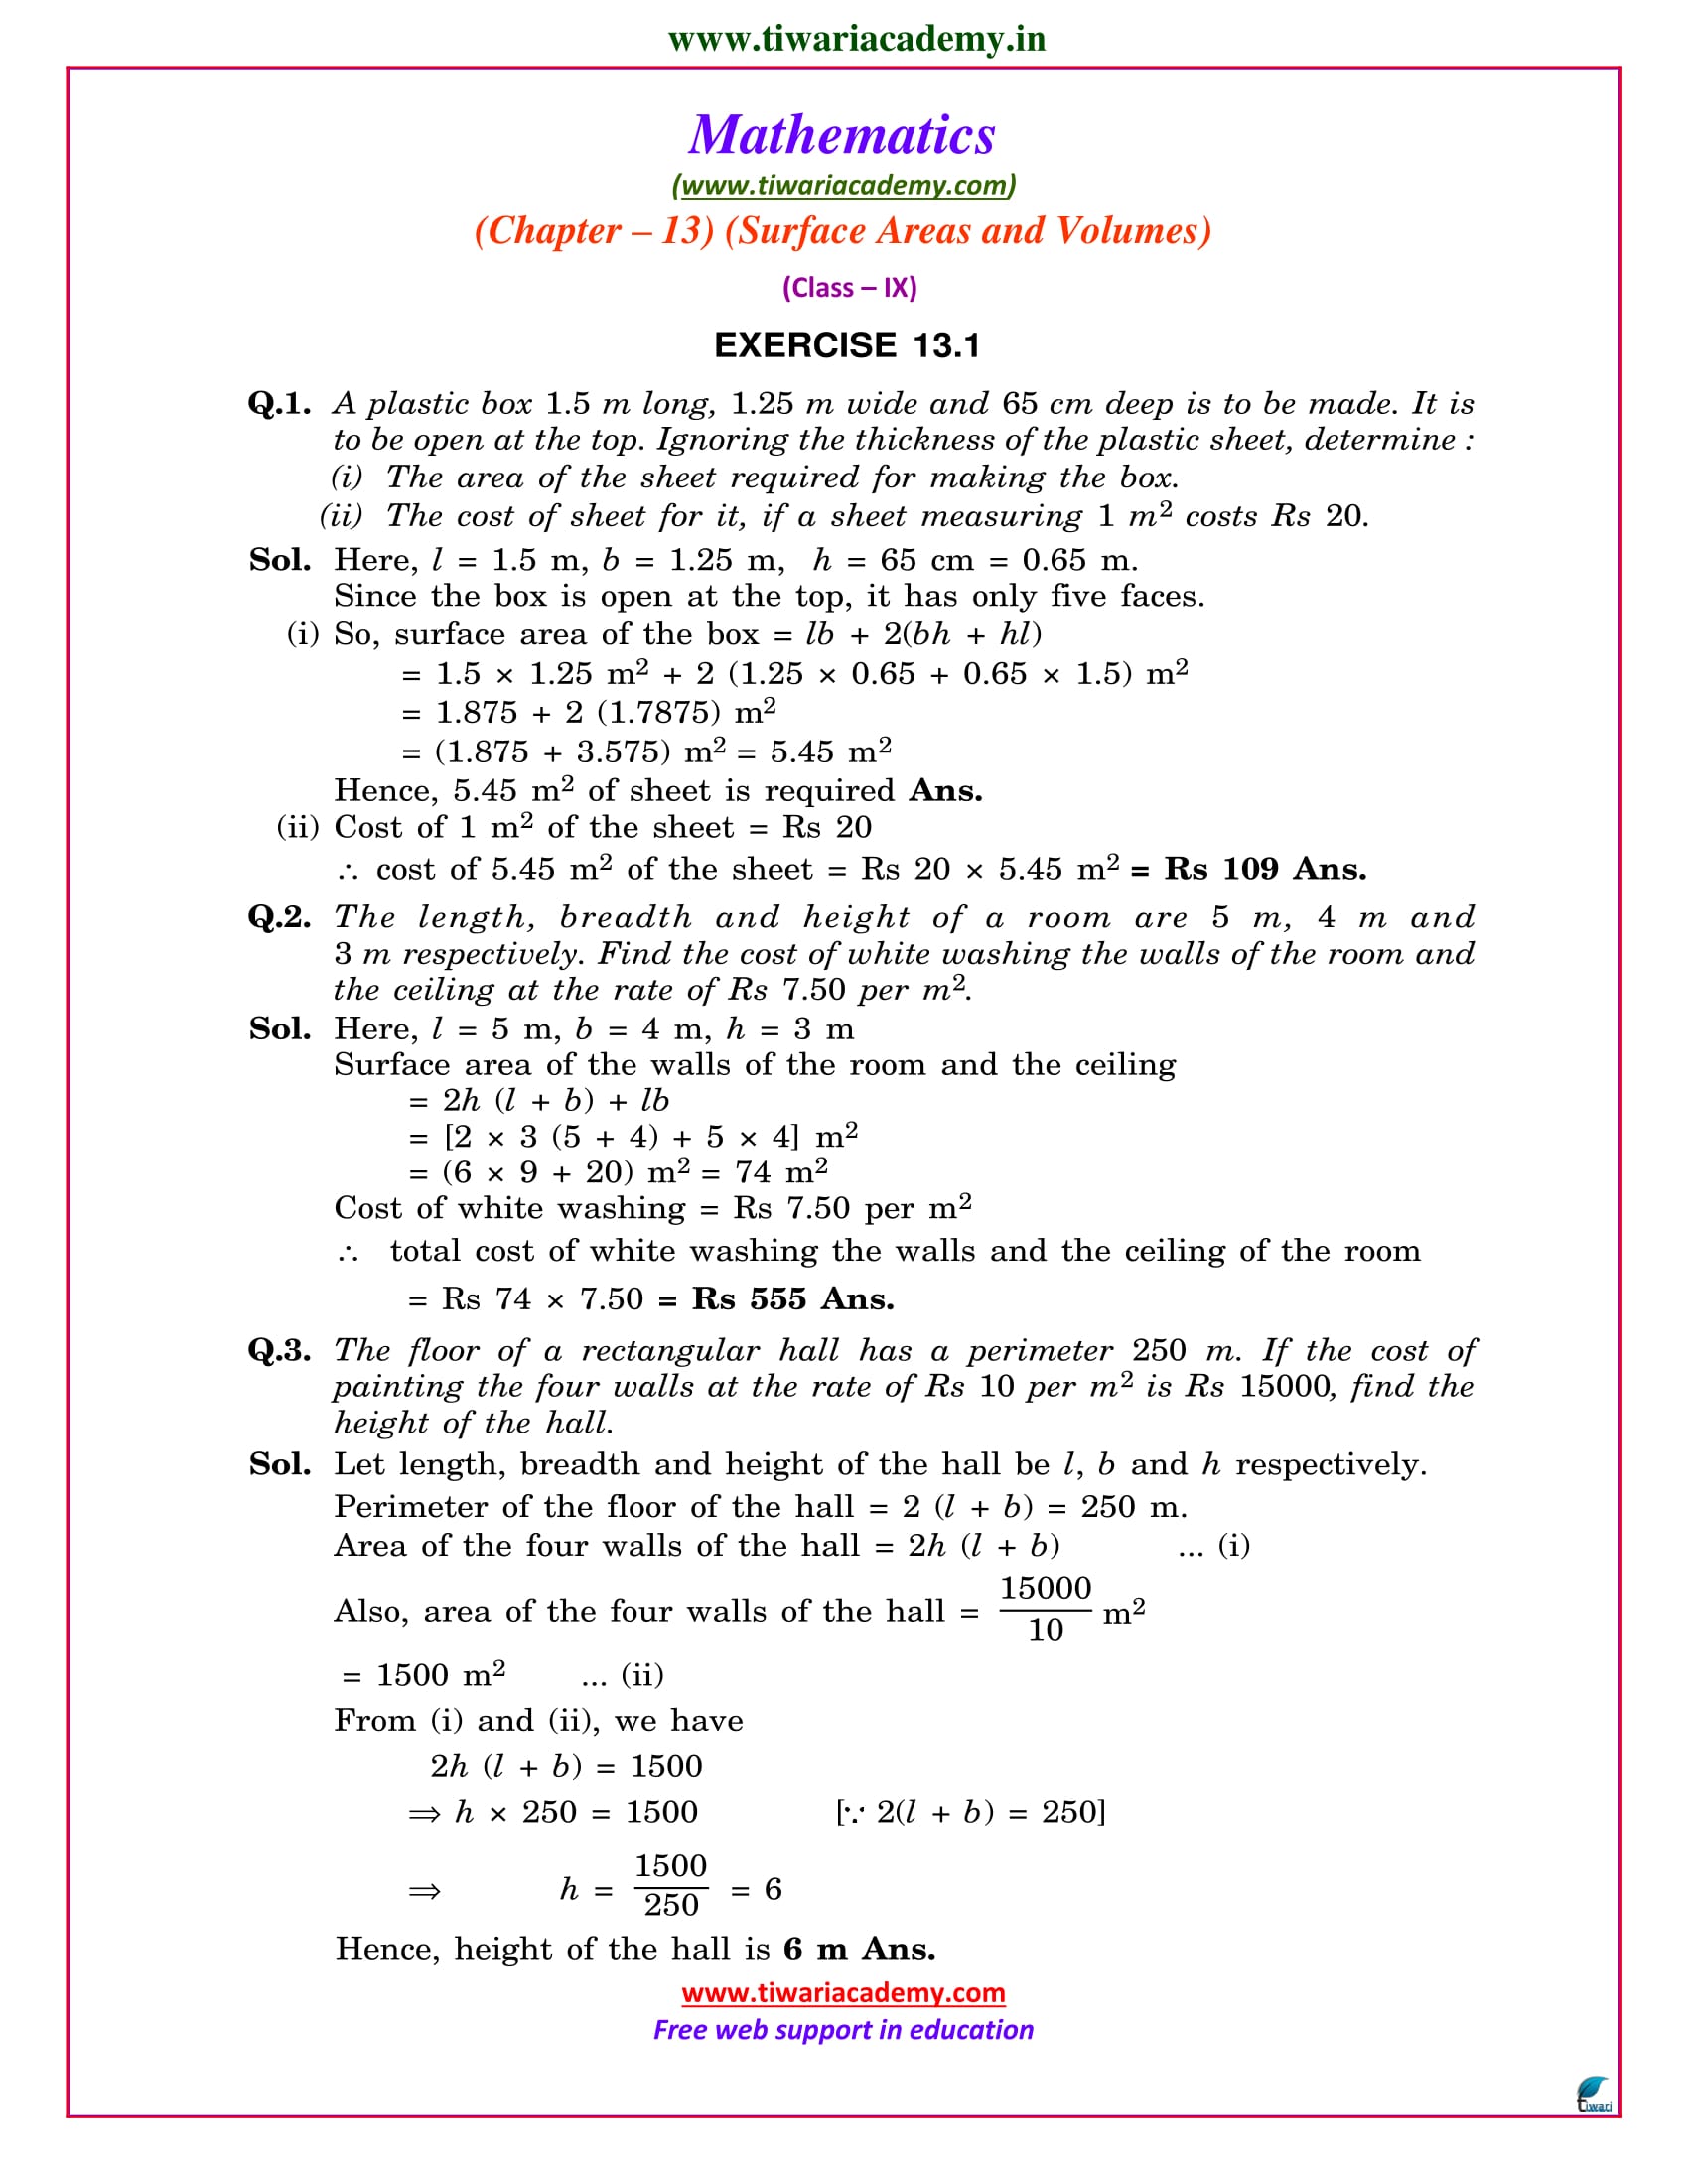 Ncert Solutions For Class 9 Maths Chapter 13 Exercise 131 And 132 